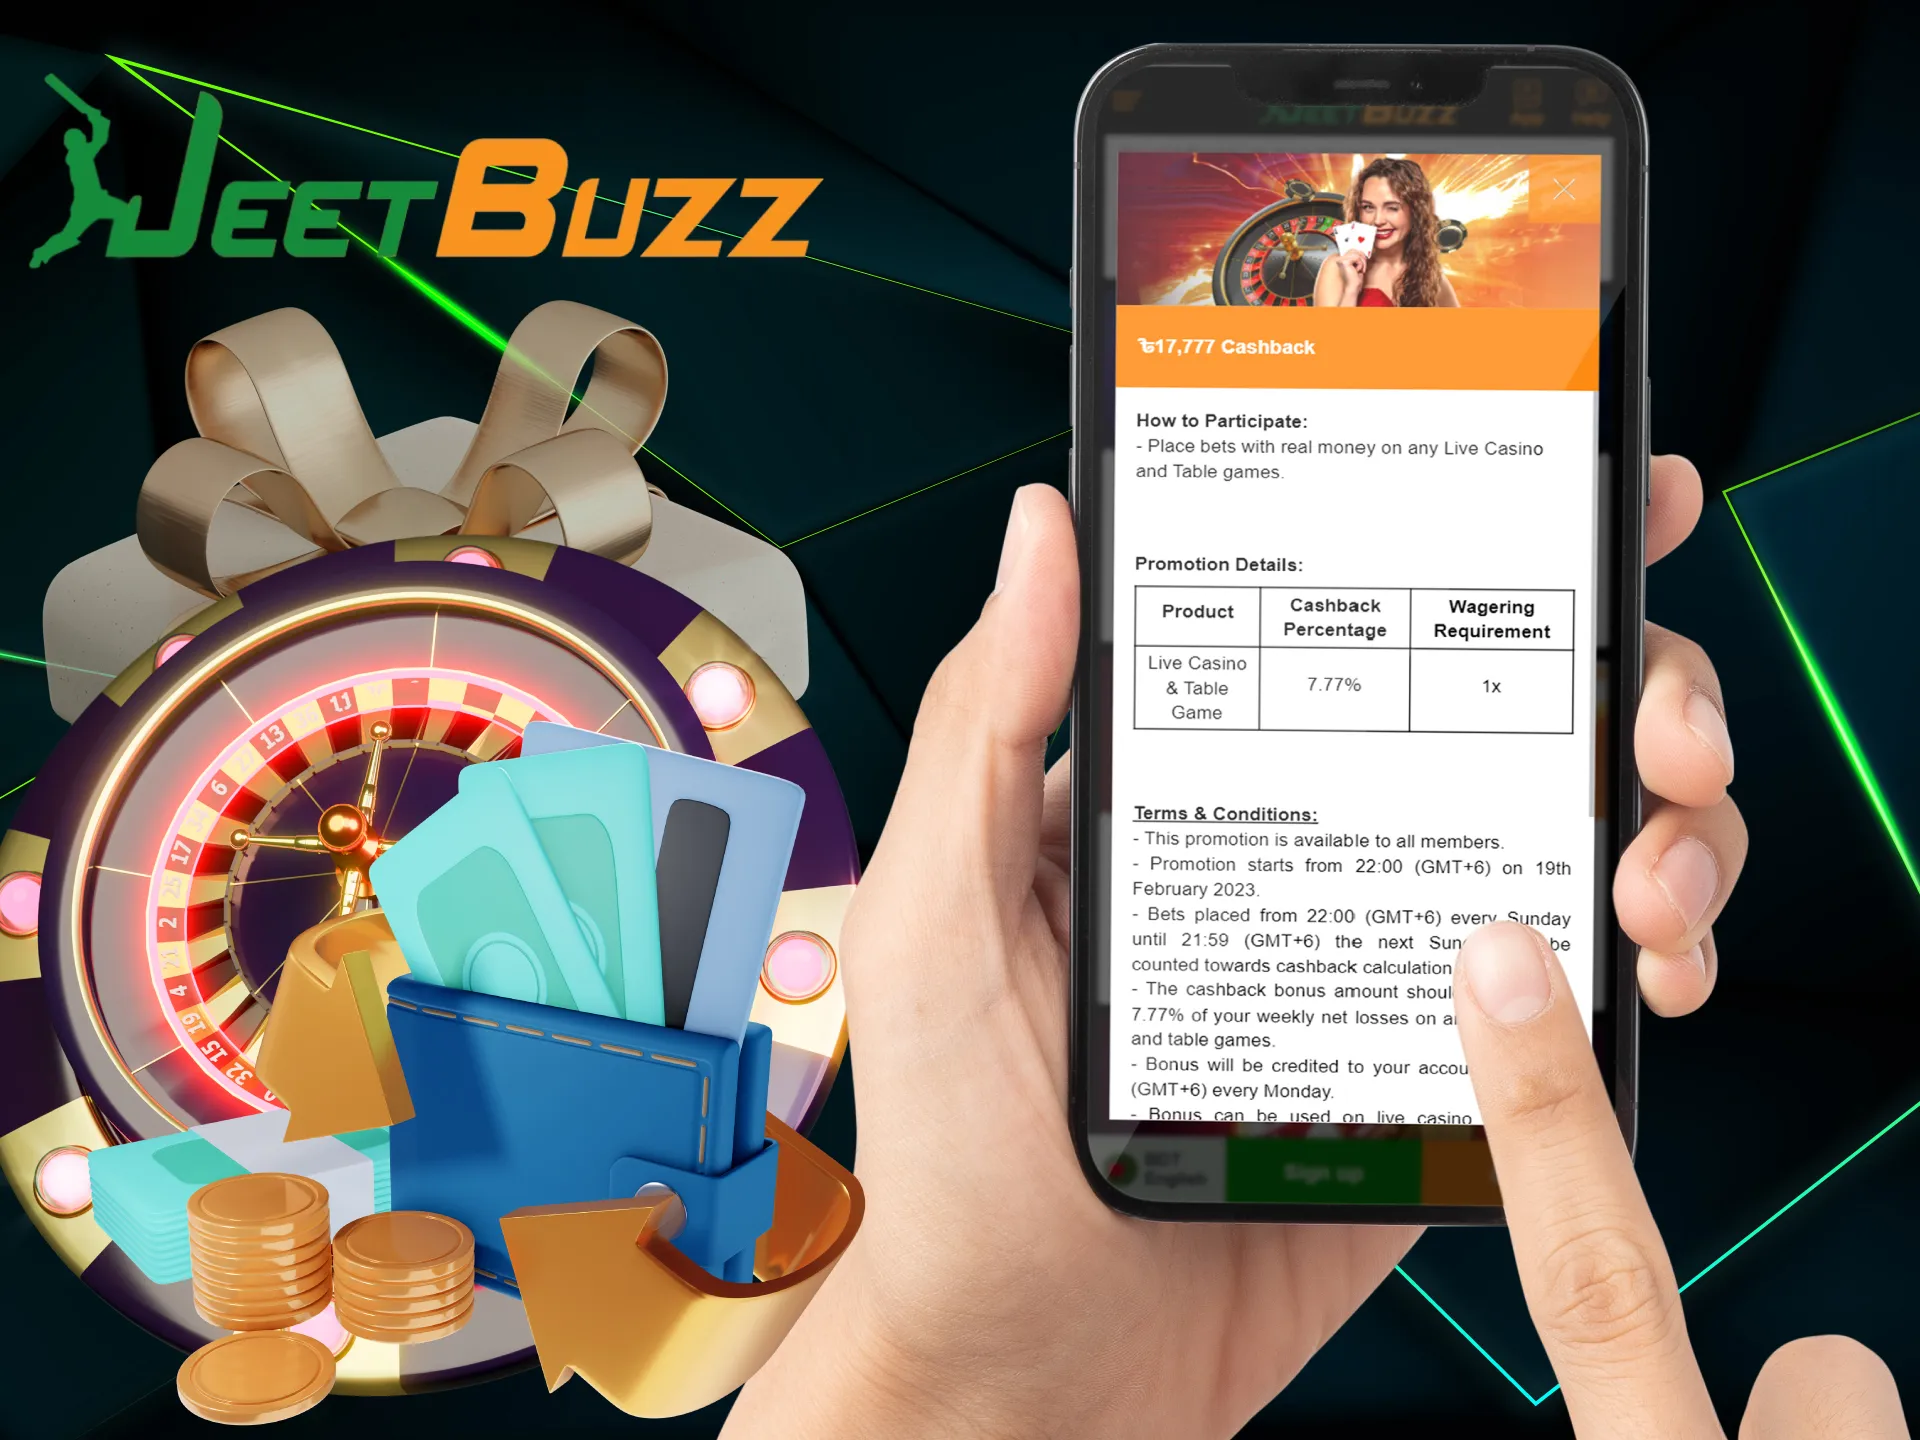 You can get a cashback of ৳17,777 by betting at JeetBuzz Casino.